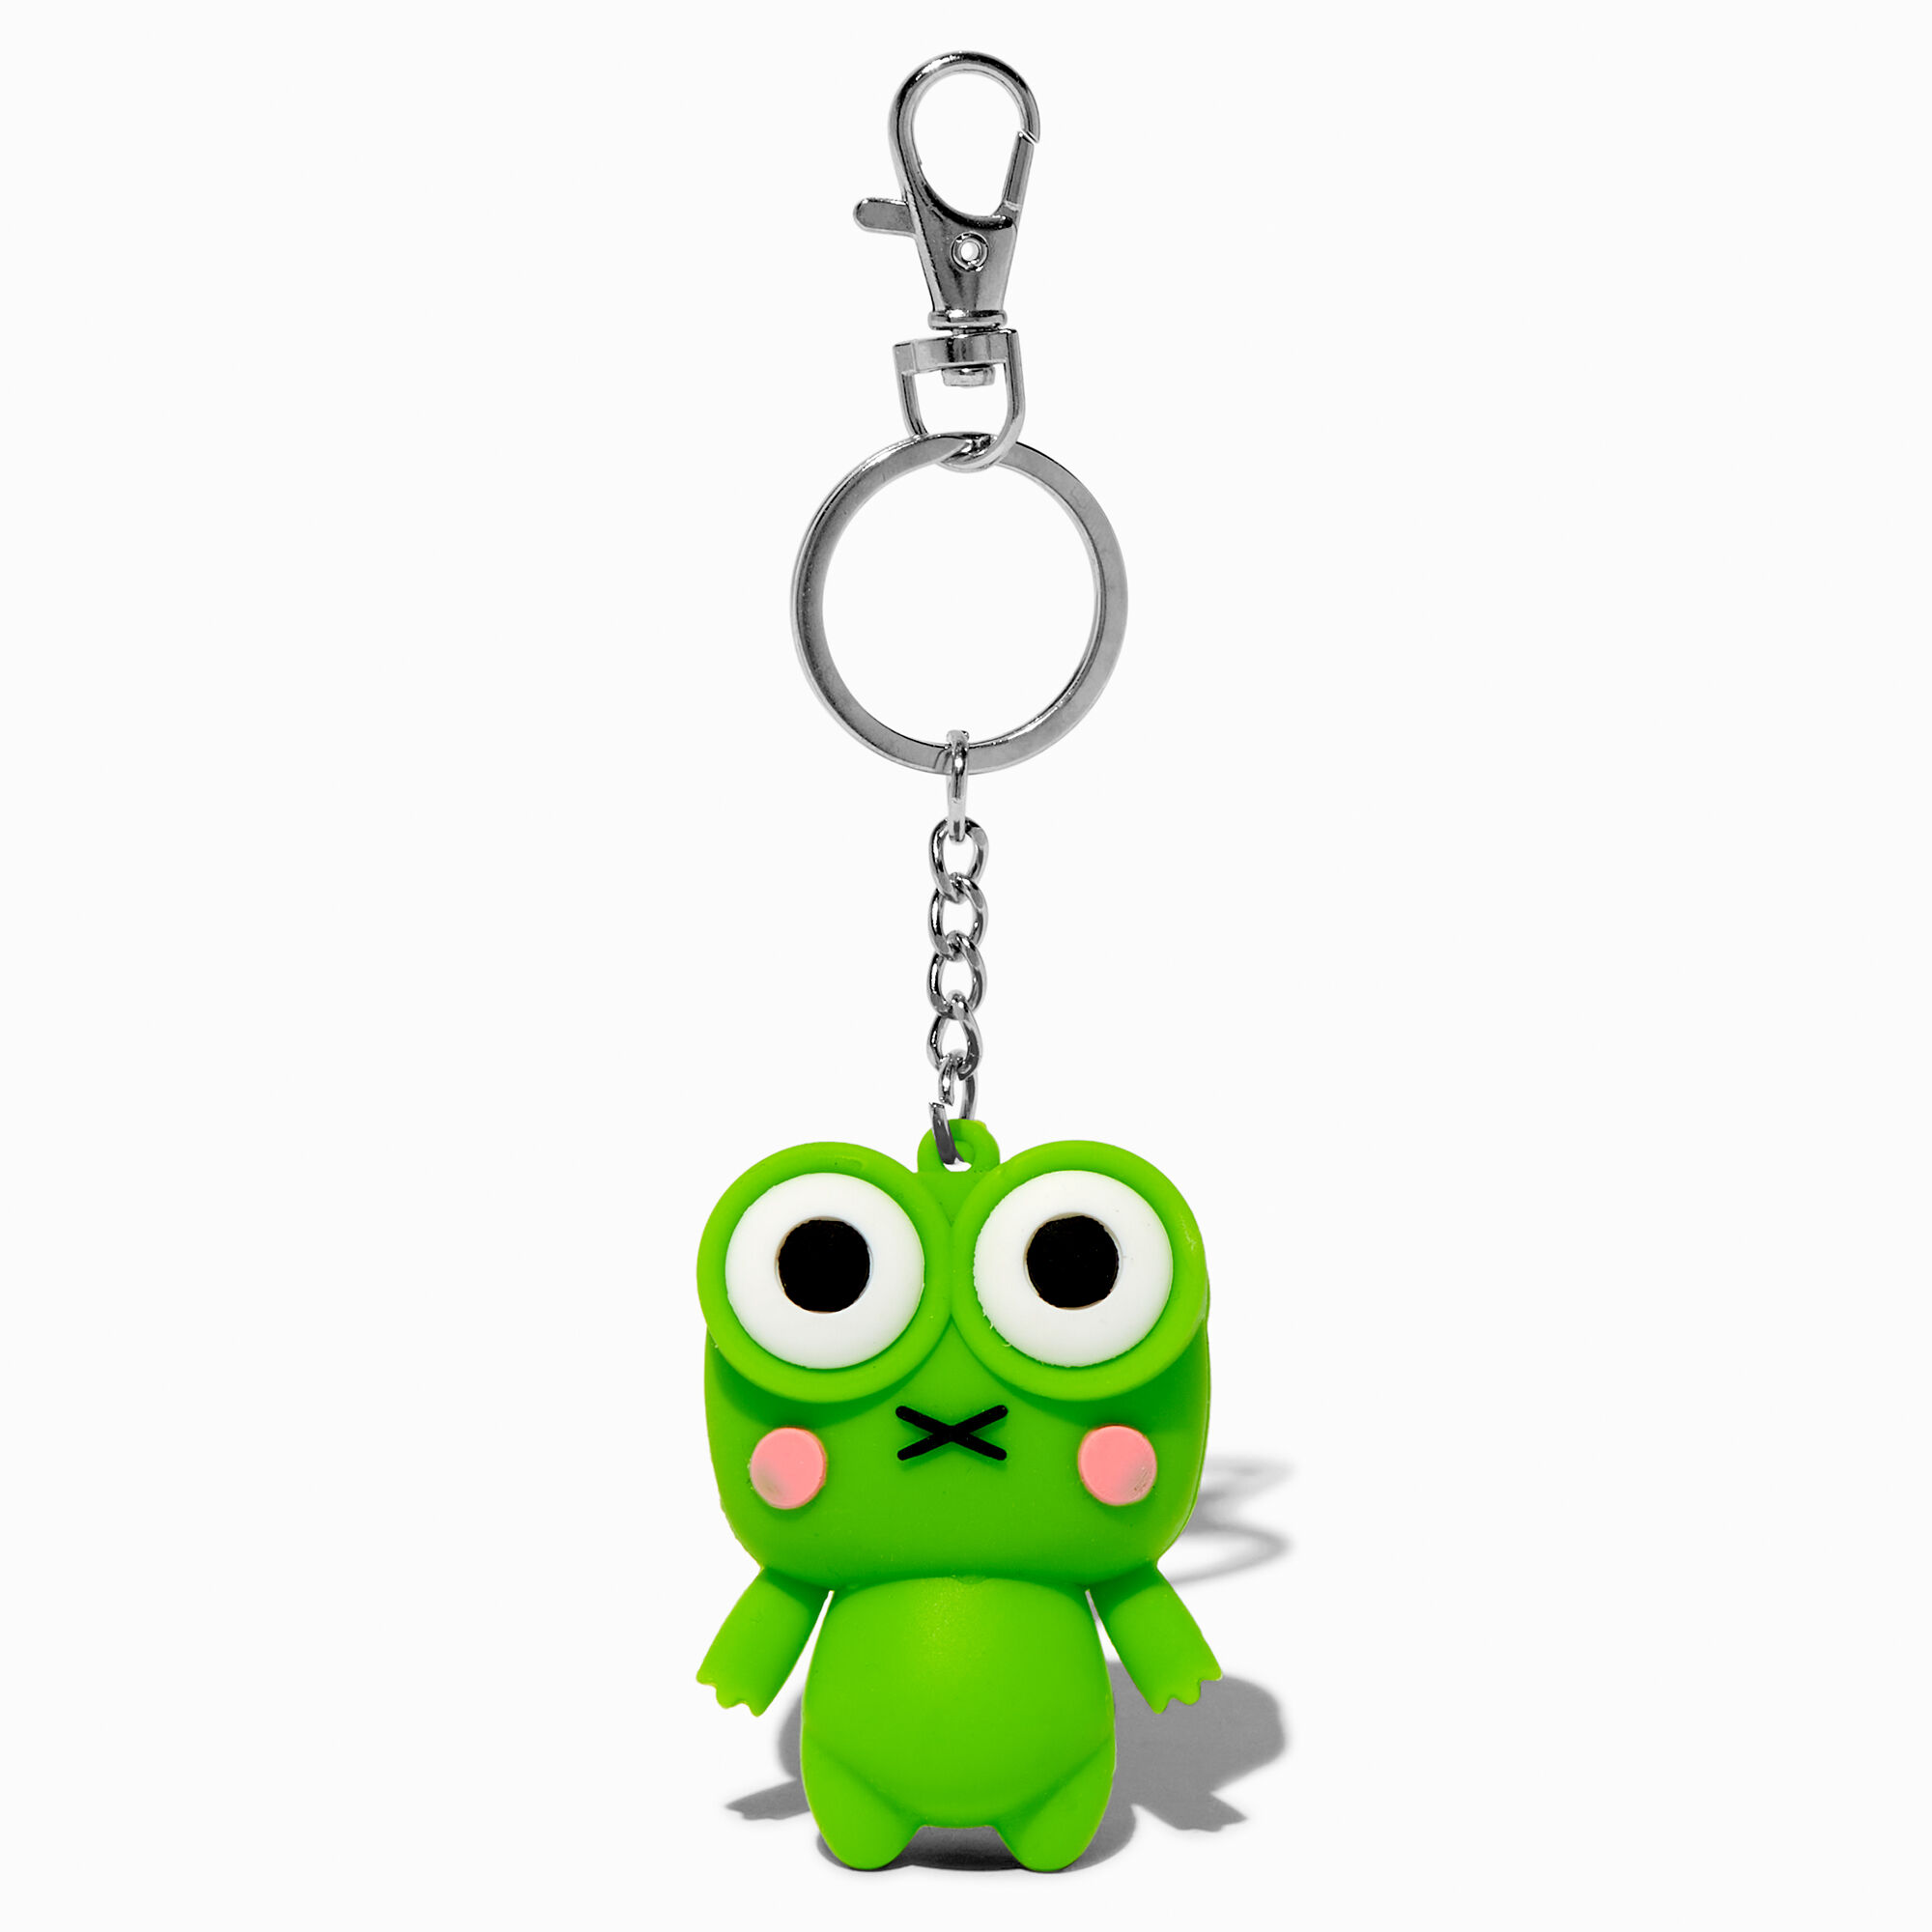 View Claires Squeeze Eyes Frog Keychain information